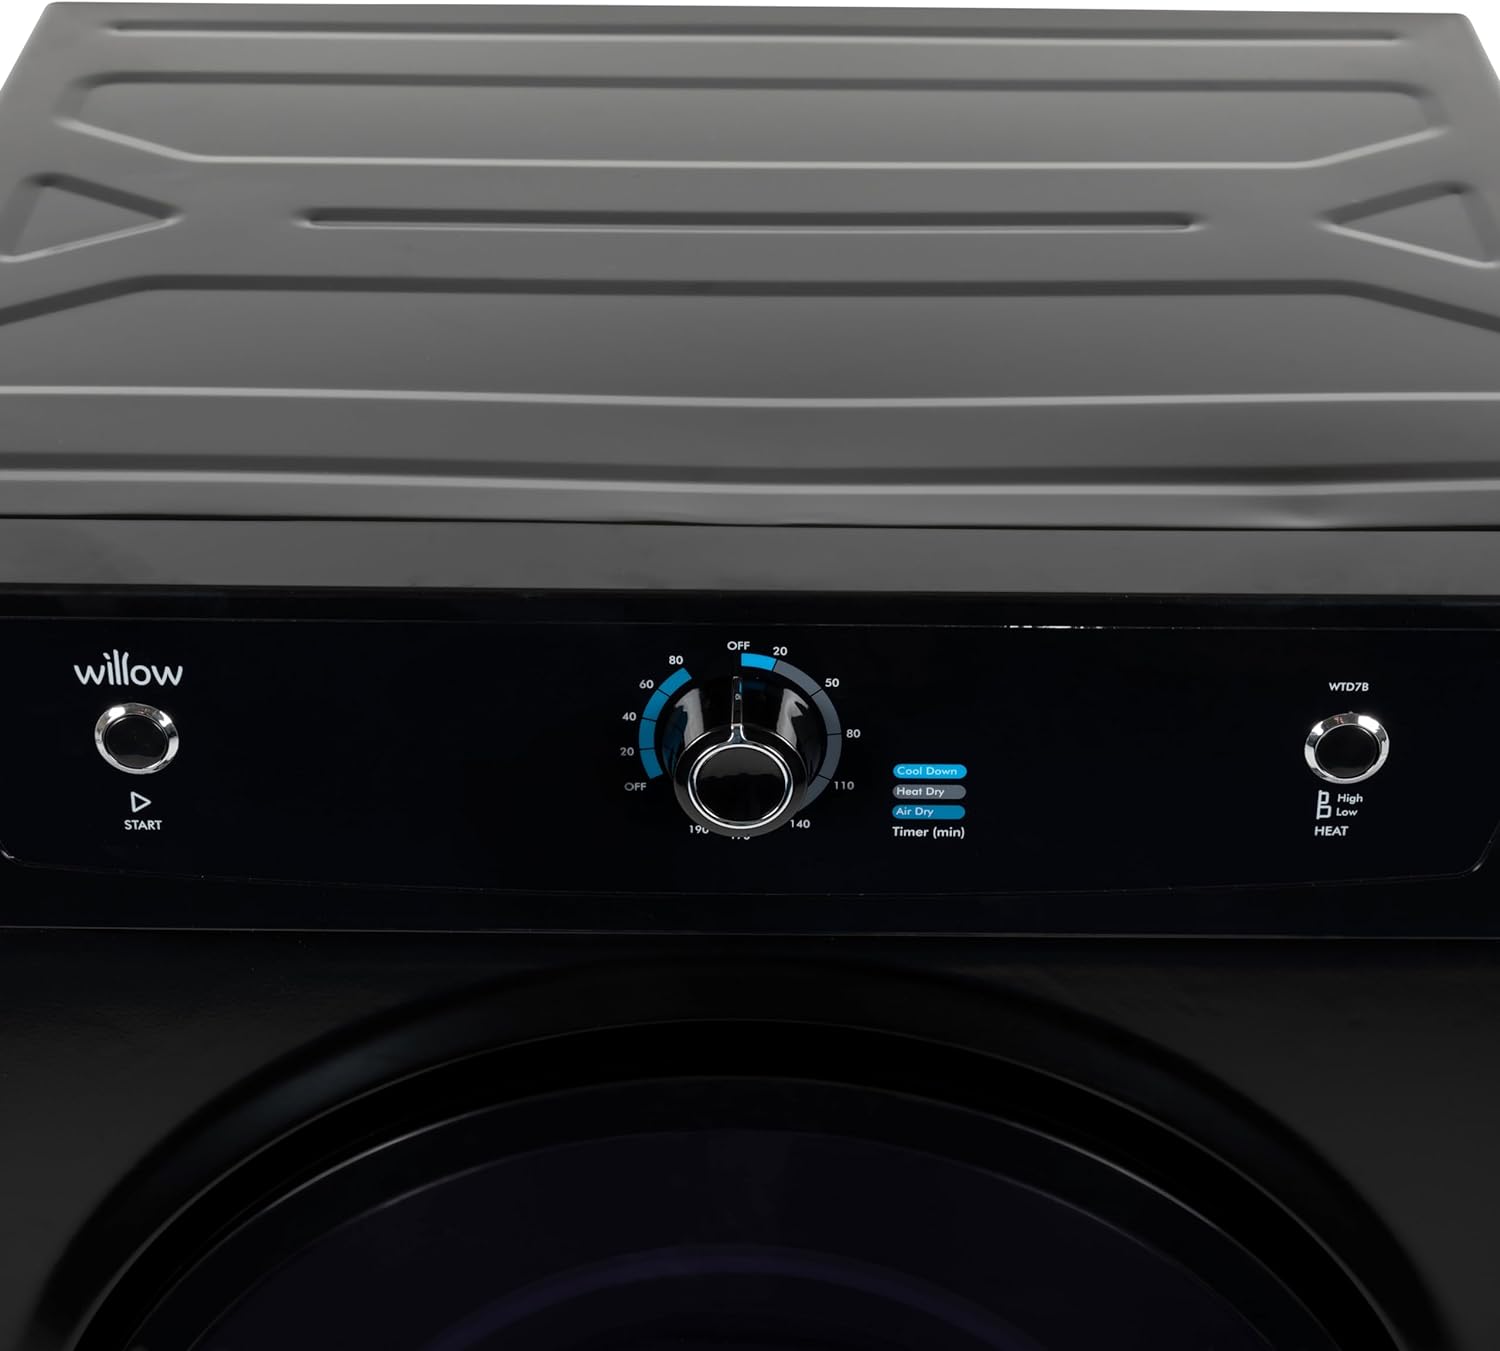 Willow WTD7B 7kg Vented Dryer, Front Loading with Child Lock, 3 Temperatures, Mehanical Controls, Crease Guard, 2 Year Warranty - Black - Amazing Gadgets Outlet